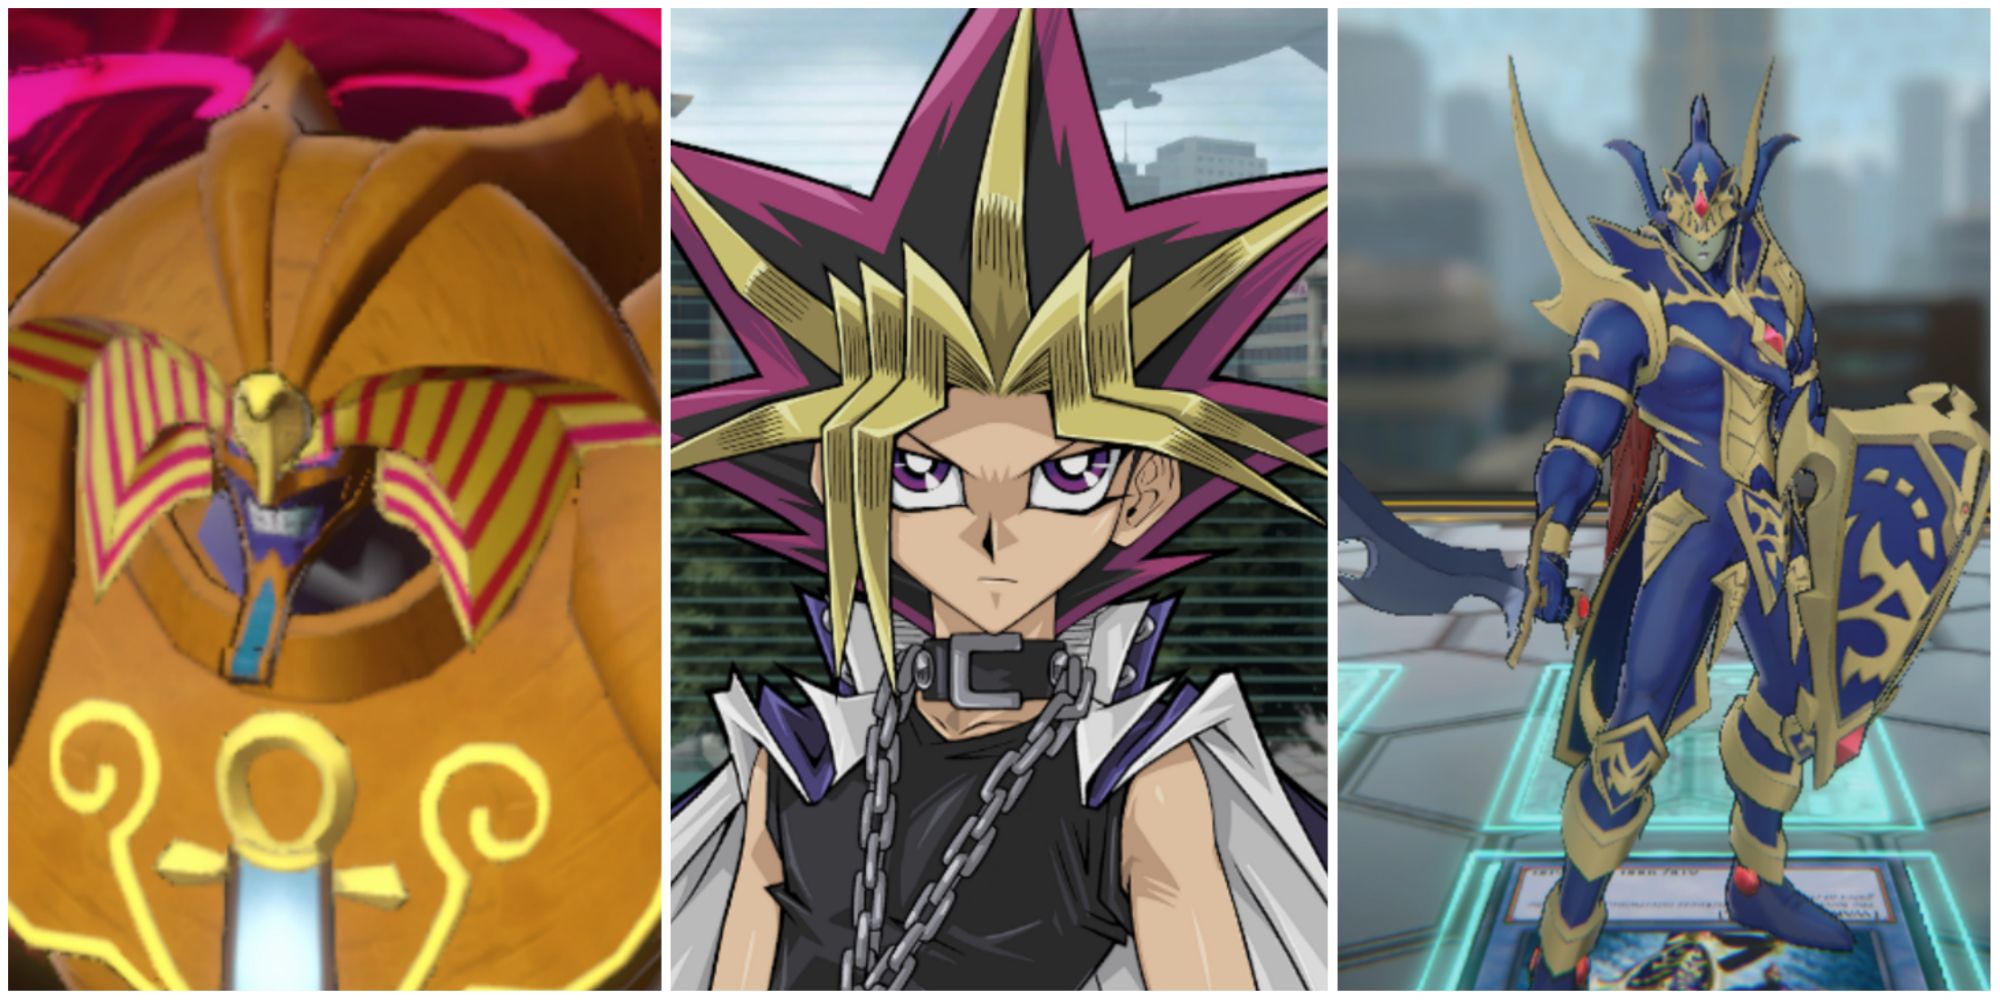 Yu-Gi-Oh! Cross Duel - split feature image featuring screenshots of Exodia, Yugi, and the Black Luster Soldier